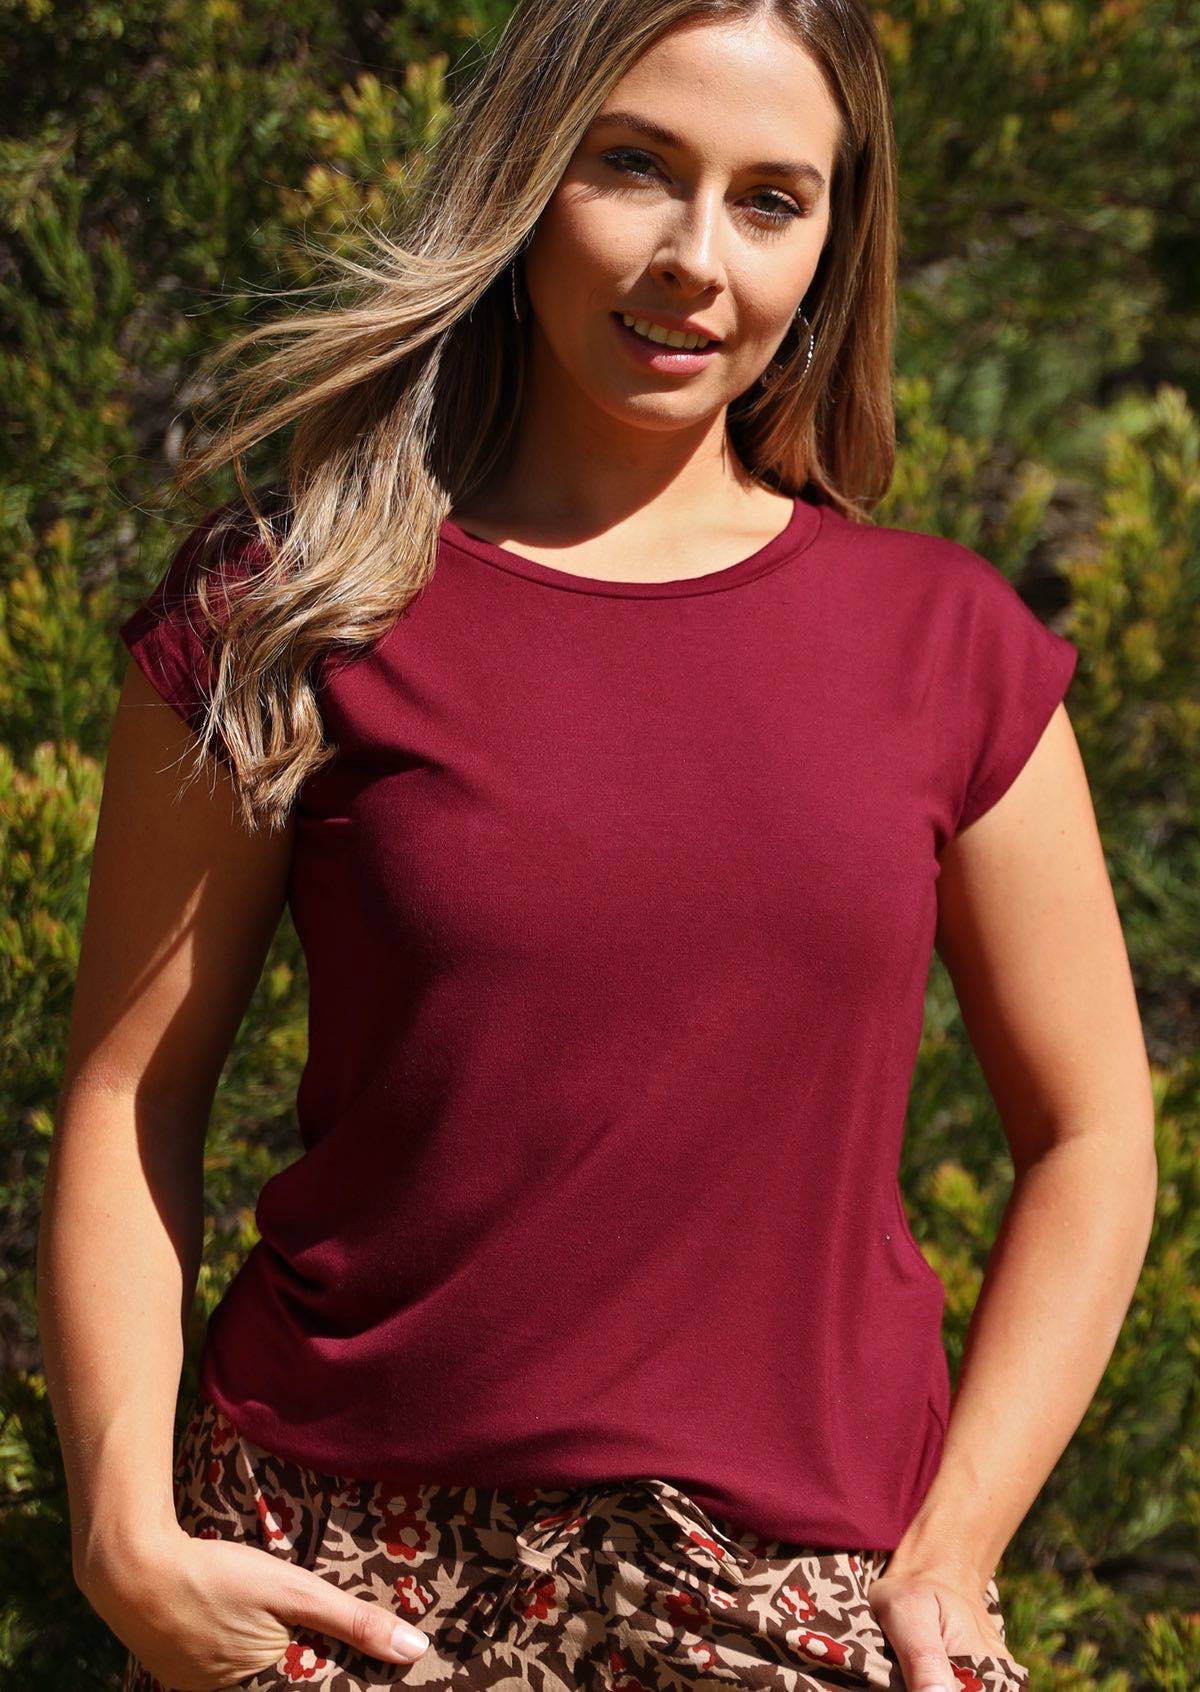 Woman with blonde hair wearing a soft flattering fit maroon rayon jersey t-shirt.